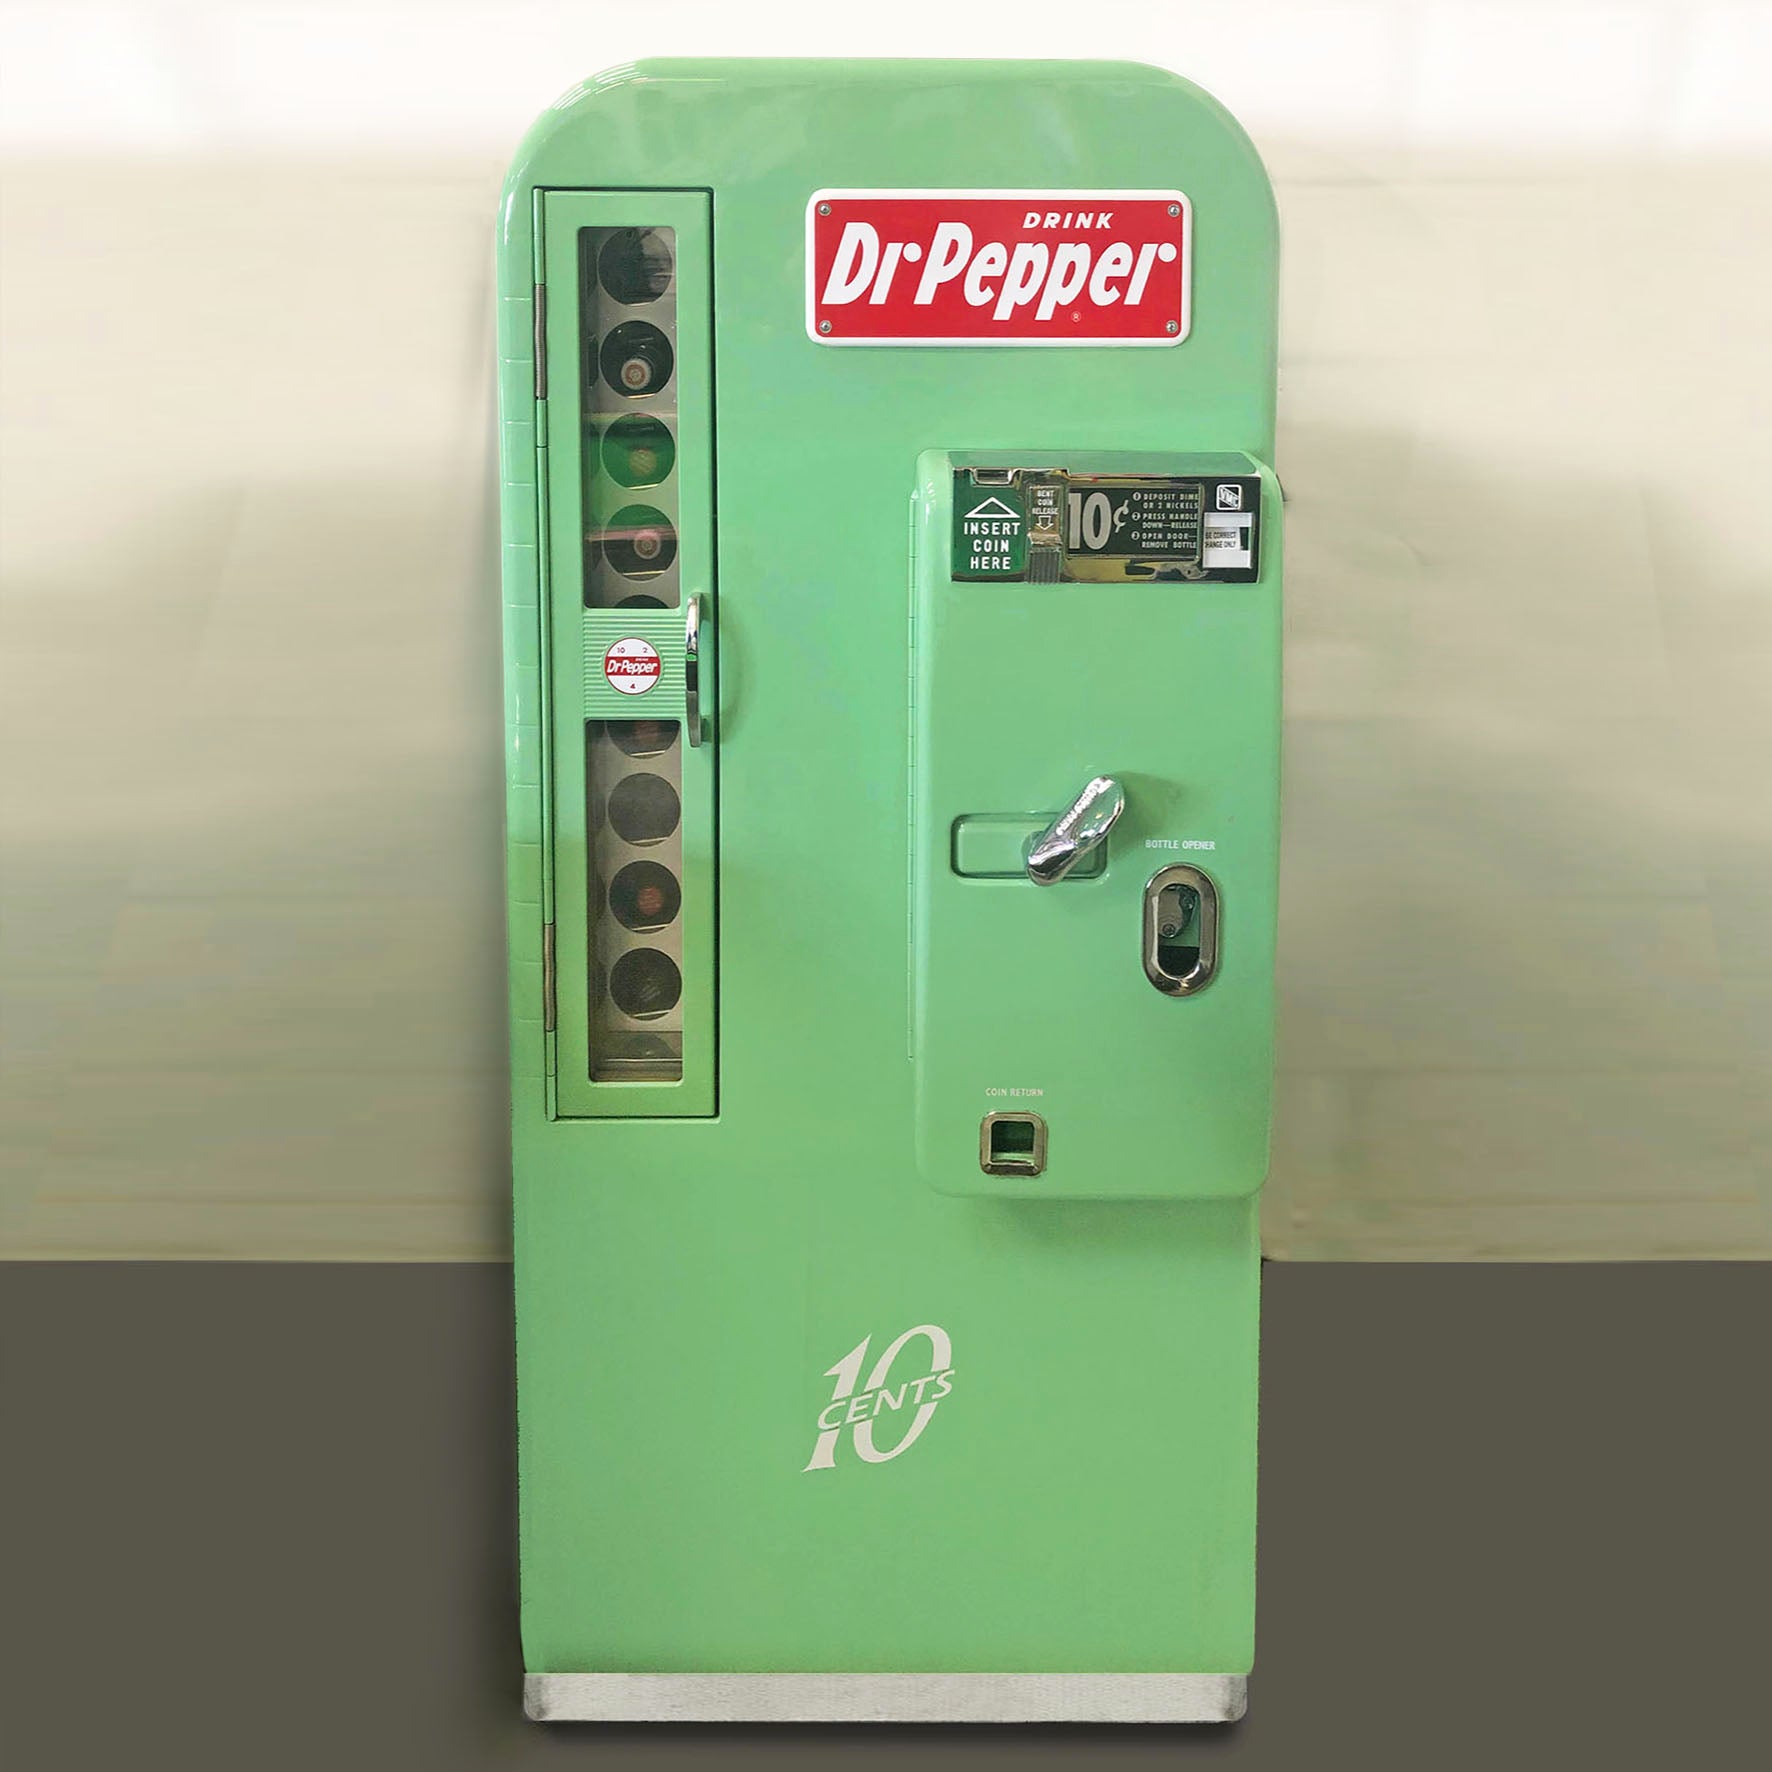 cedric beckers recommends antique dr pepper machine pic